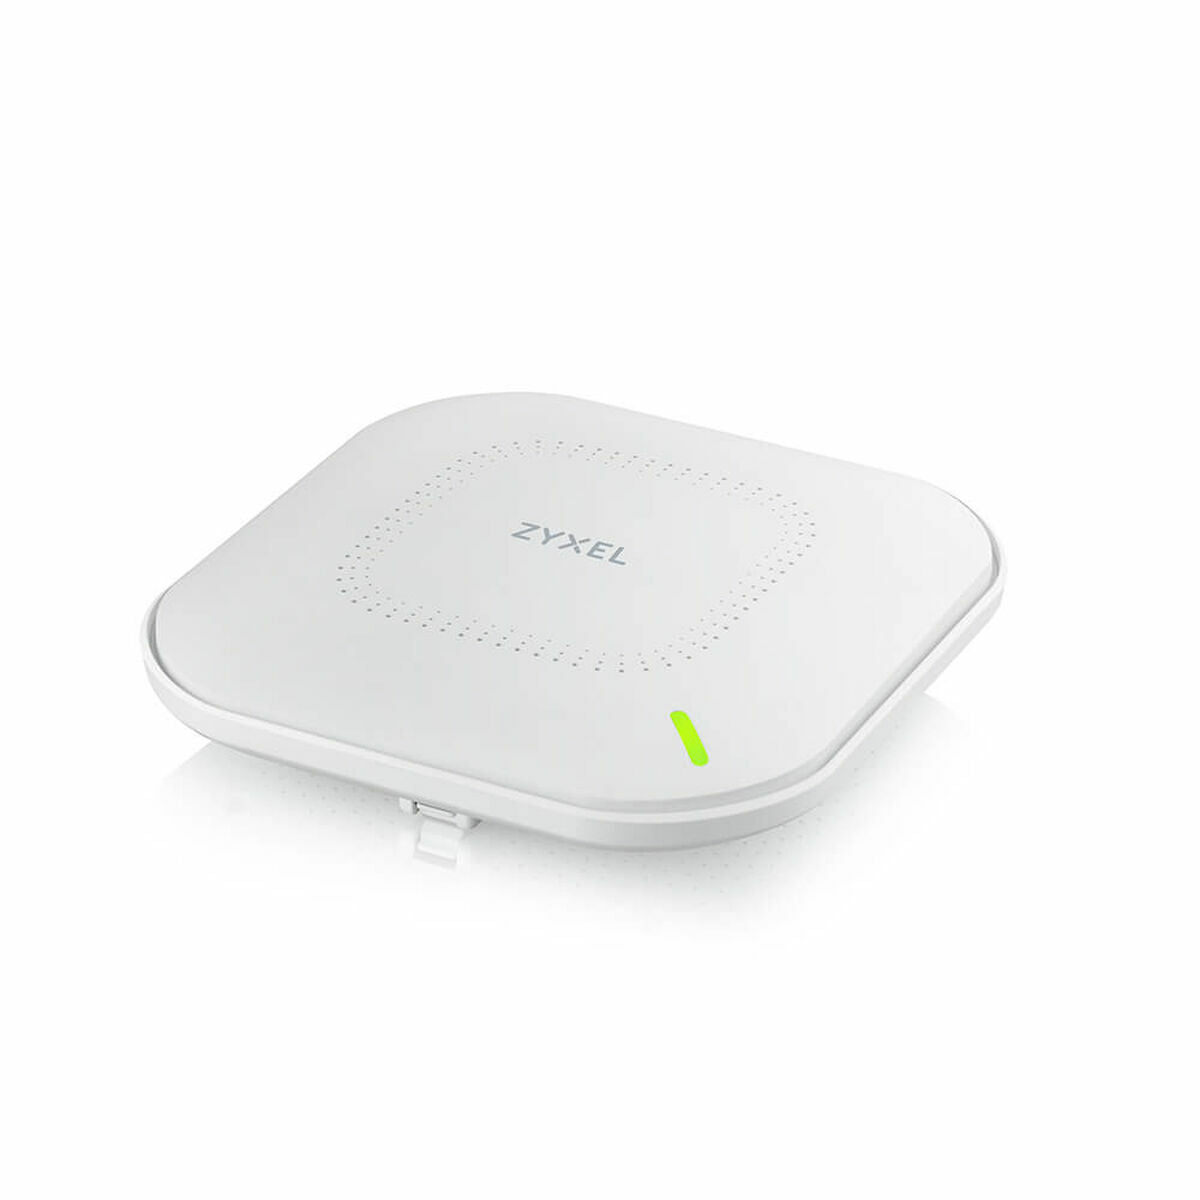 Access point ZyXEL WAX630S-EU0101F, ZyXEL, Computing, Network devices, access-point-zyxel-wax630s-eu0101f, Brand_ZyXEL, category-reference-2609, category-reference-2803, category-reference-2820, category-reference-t-19685, category-reference-t-19914, Condition_NEW, networks/wiring, Price_500 - 600, Teleworking, RiotNook